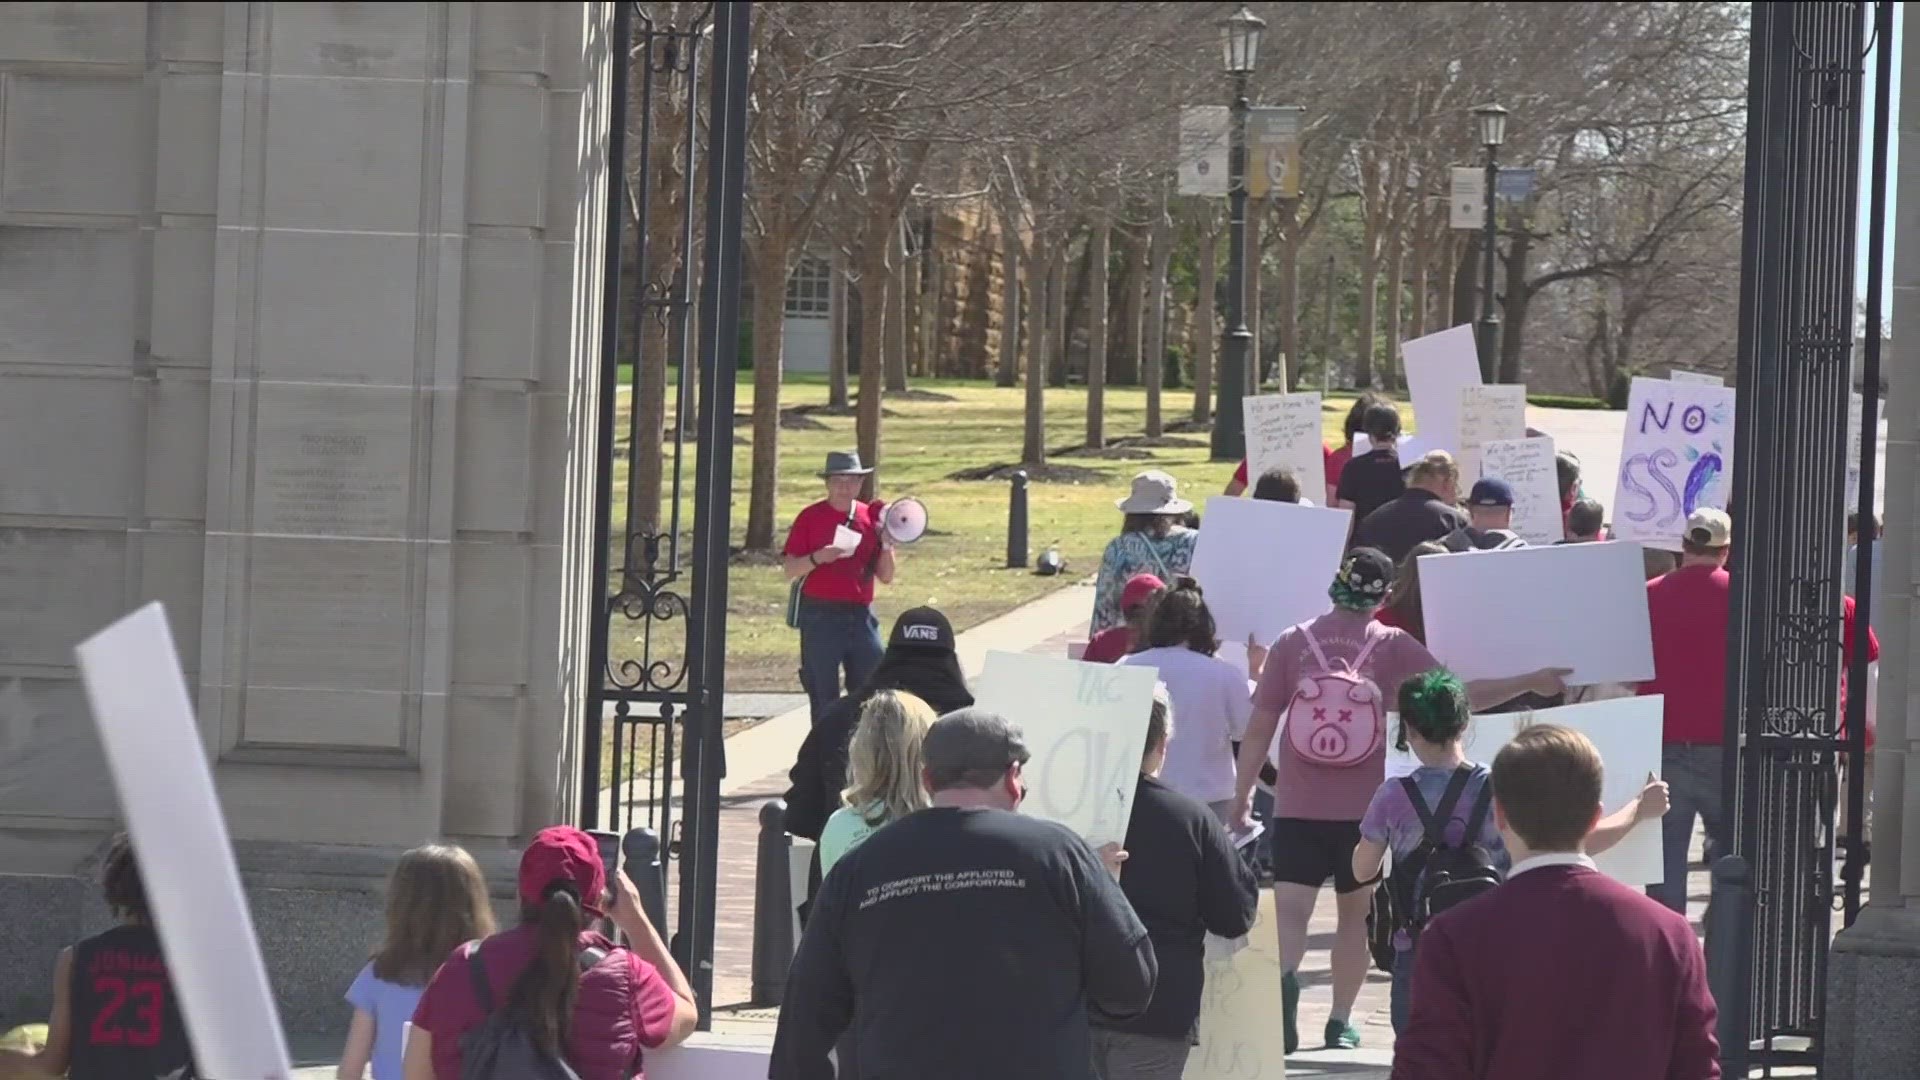 TODAY CUSTODIAL WORKERS AND COMMUNITY MEMBERS CAME TOGETHER AT THE UNIVERSITY OF ARKANSAS FOR A MARCH AND RALLY...